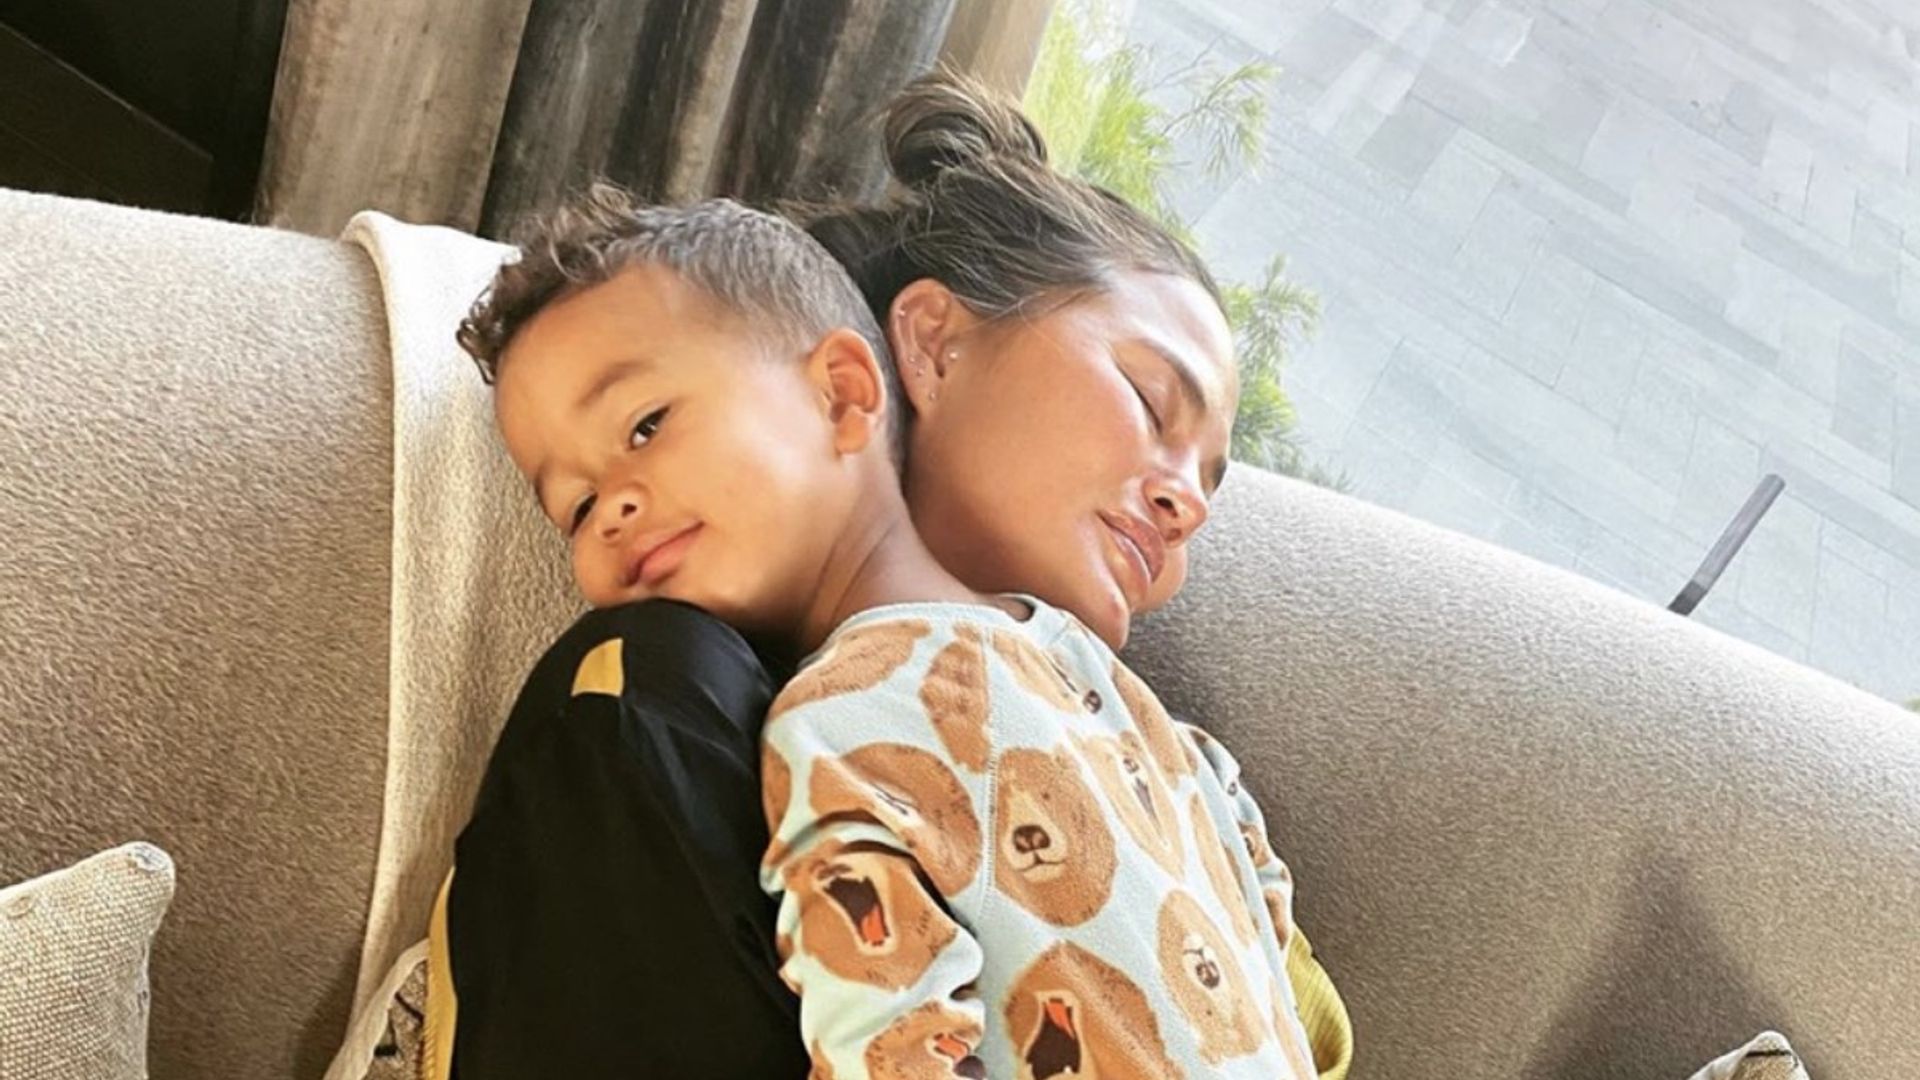 Chrissy Teigen's son defaces her wedding photo - see her surprising  reaction | HELLO!